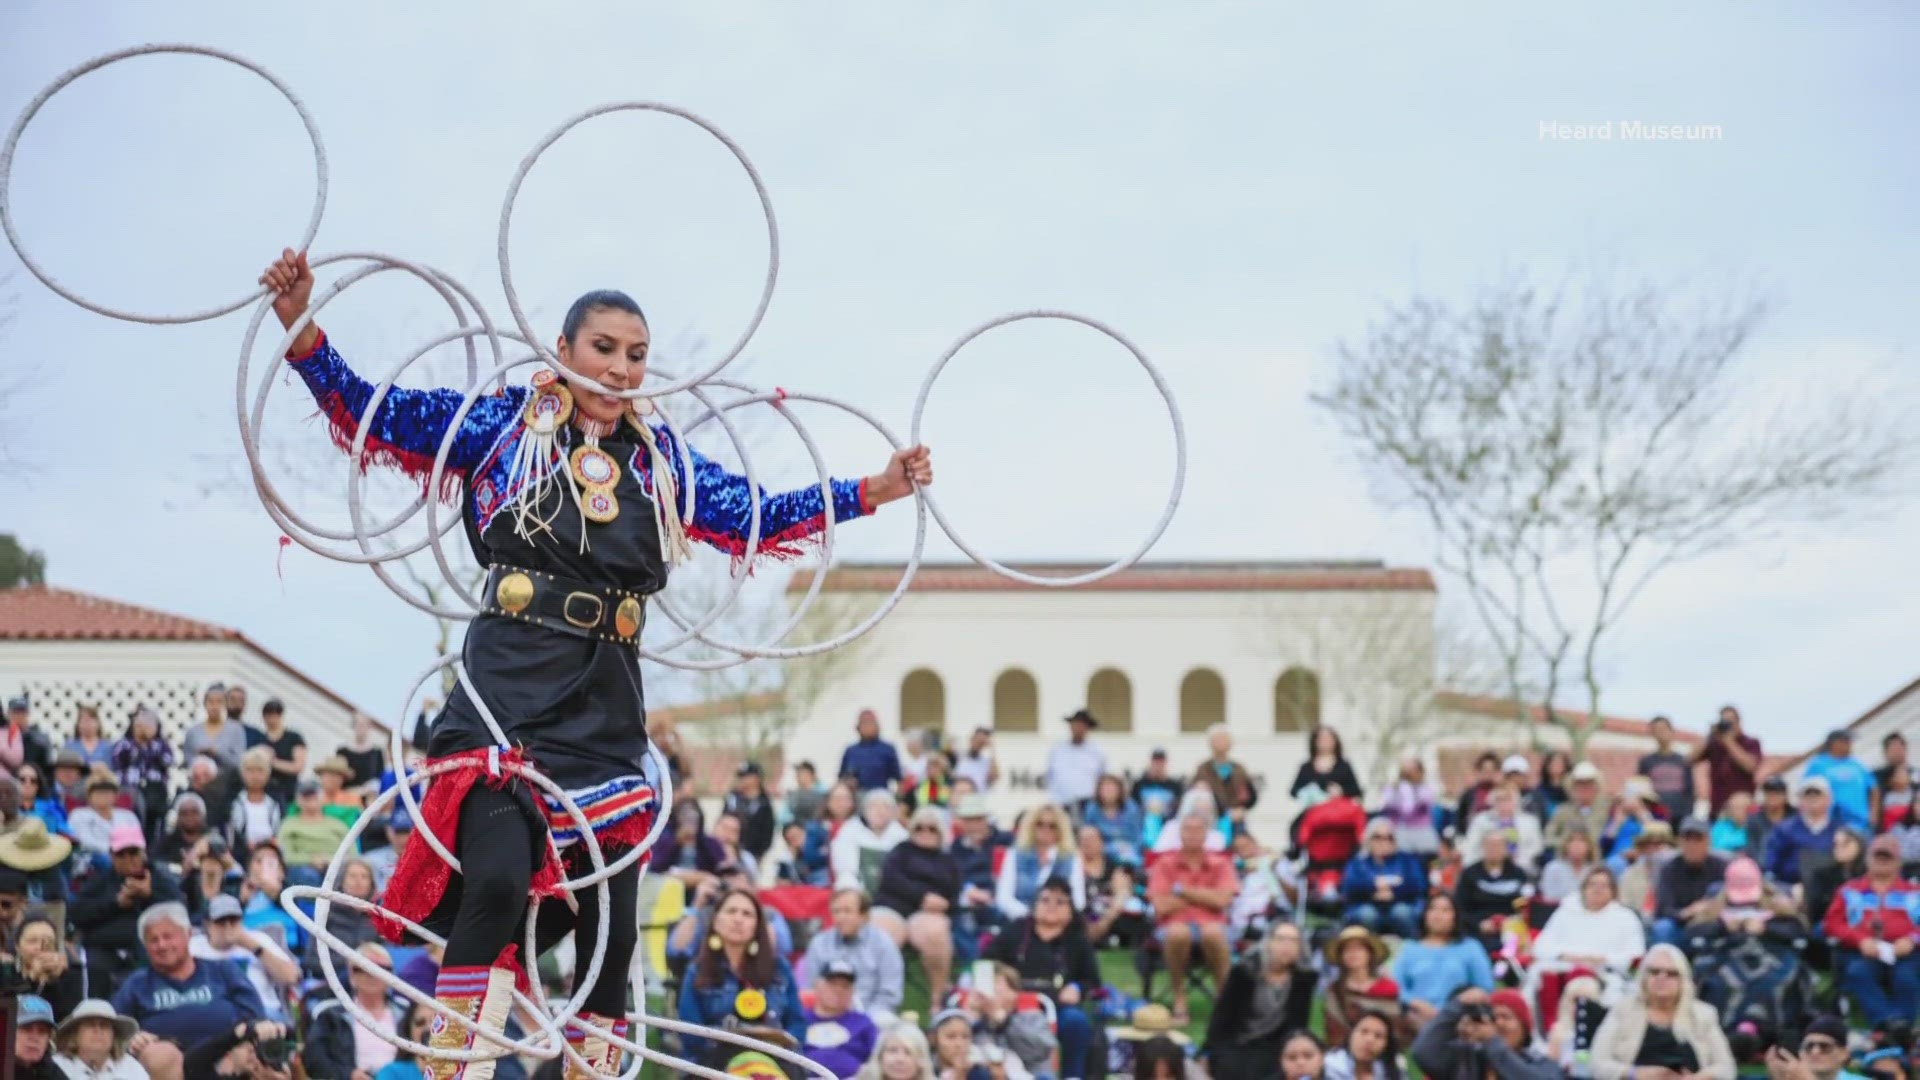 The world's best hoop dancers are set to compete in Phoenix at the Heard Museum. We talk to one of the competitors ahead of the event.